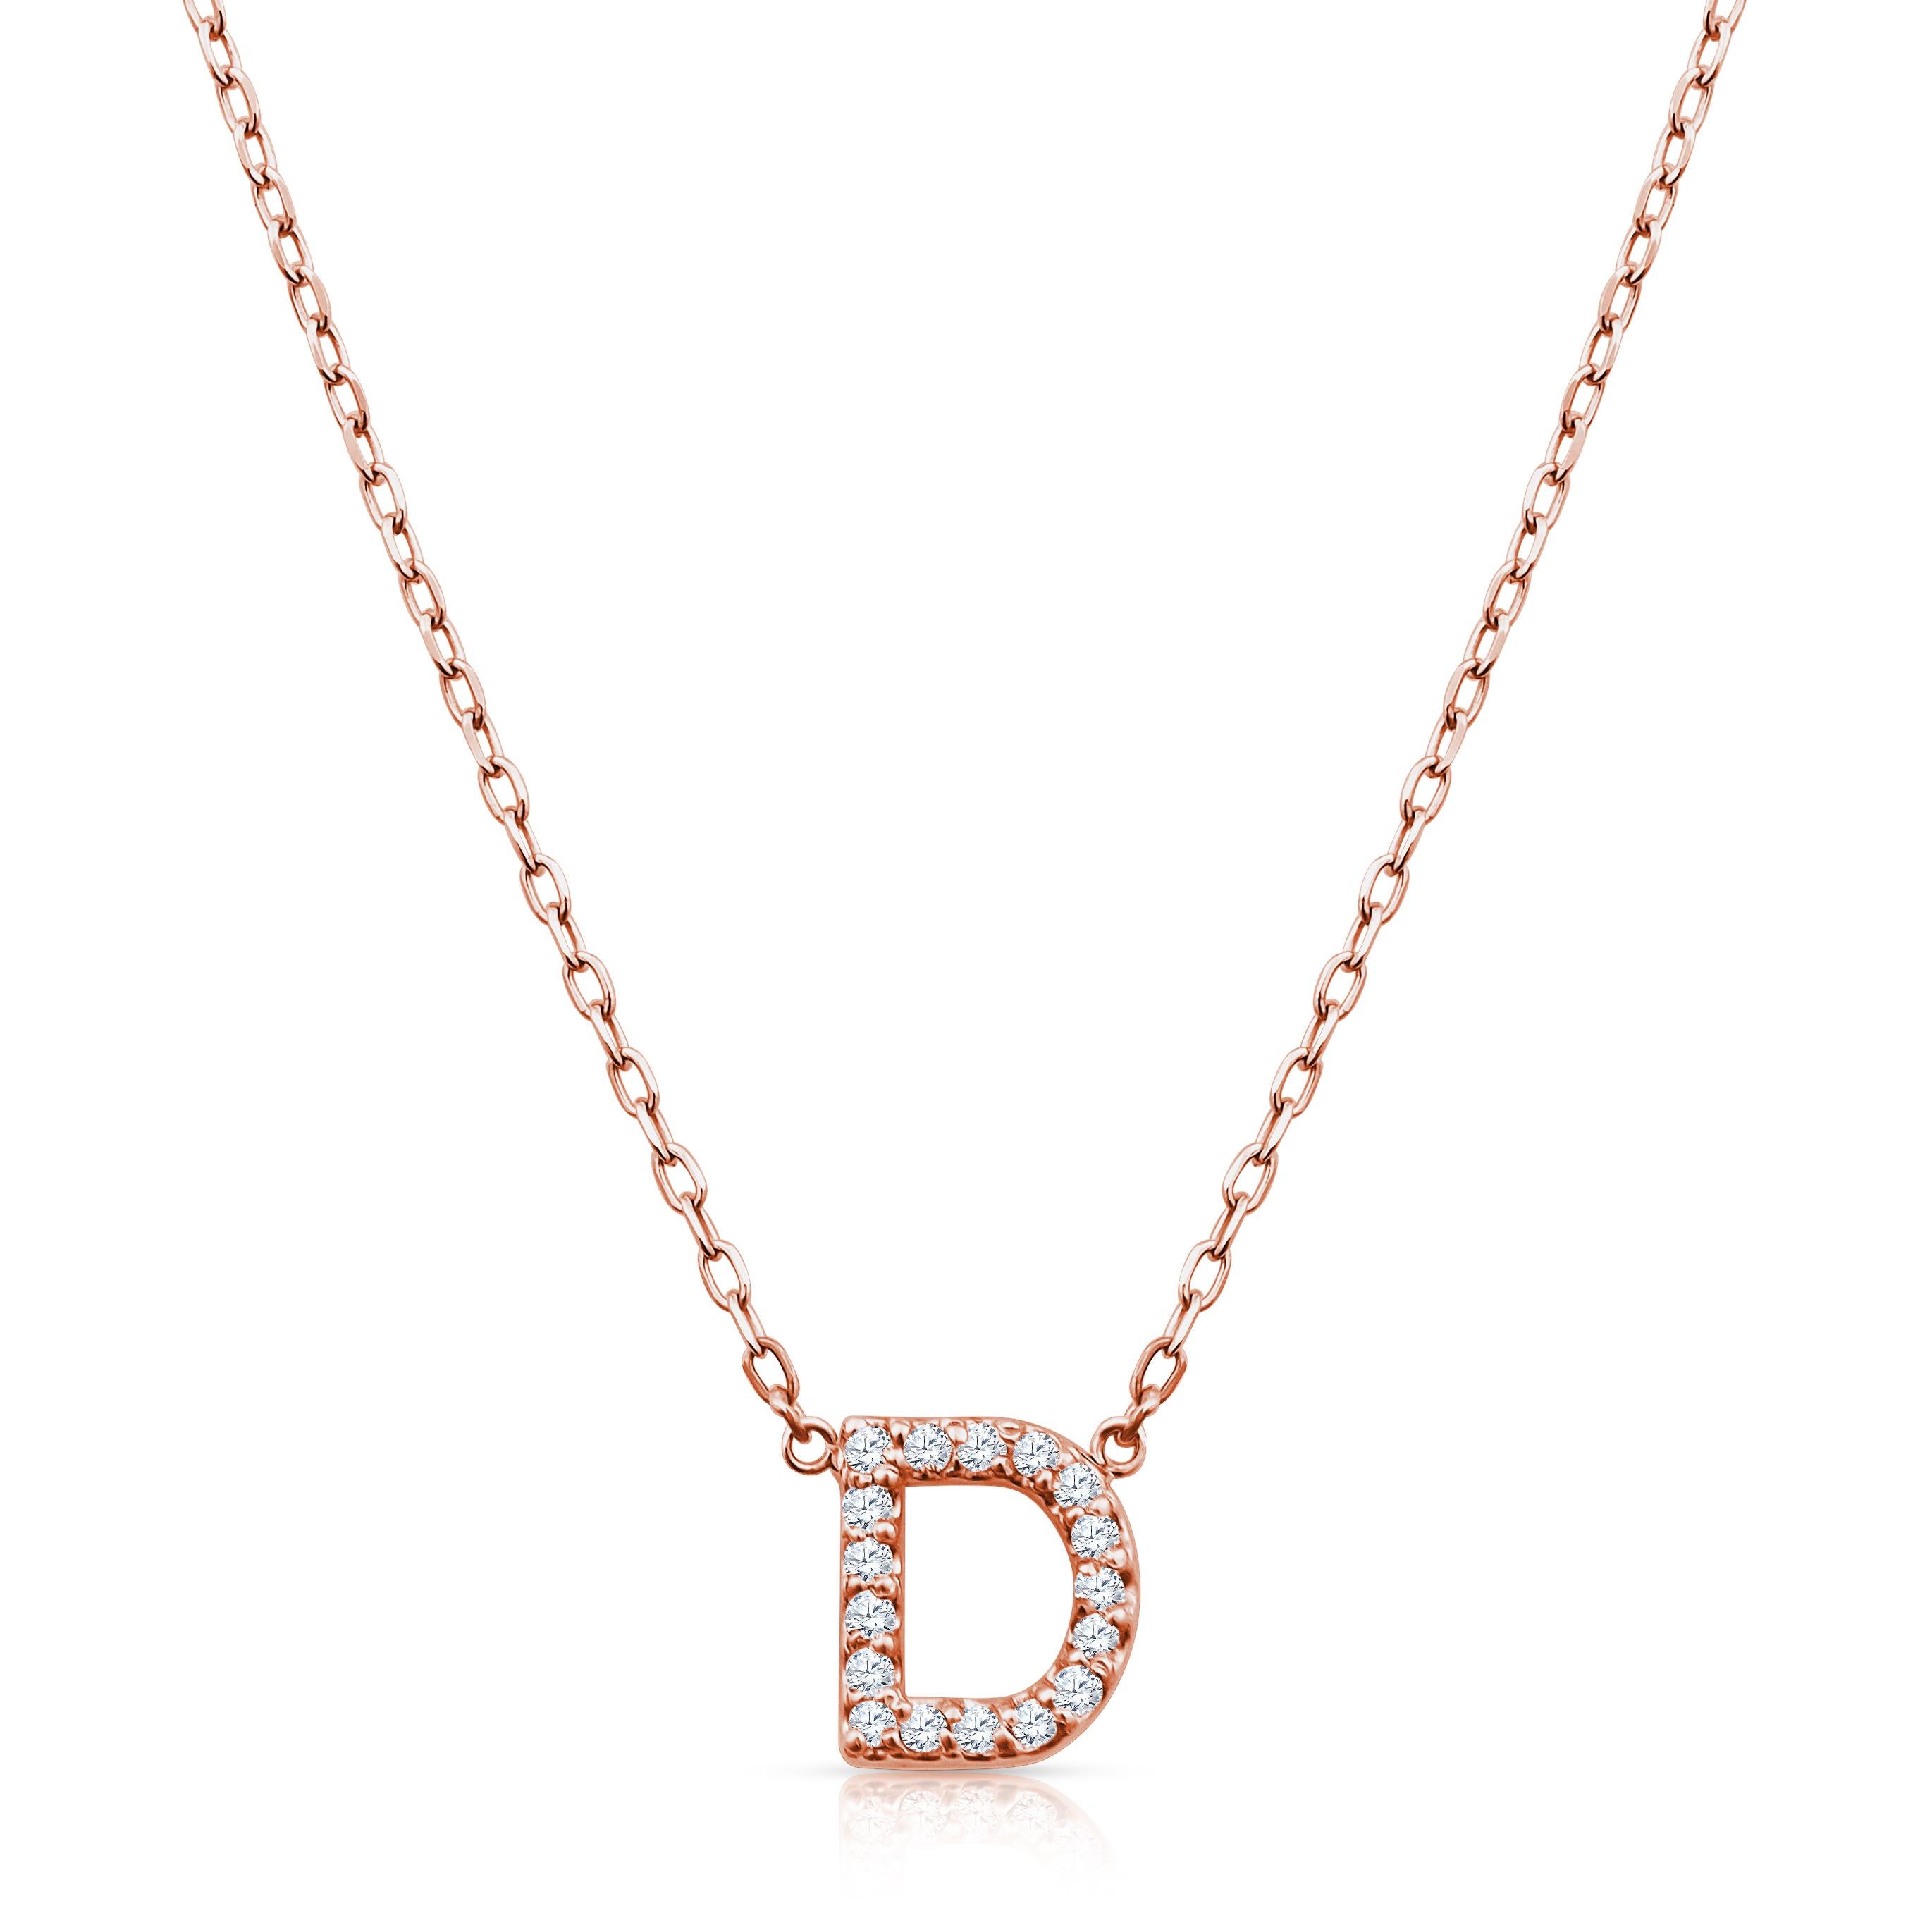 These initial pendants are made-to-order with any custom initial featuring round brilliant diamonds. The necklaces come in 14kt white, yellow, or rose gold, and feature round diamonds in a 16 inch cable chain. Please allow 2-3 weeks for delivery.